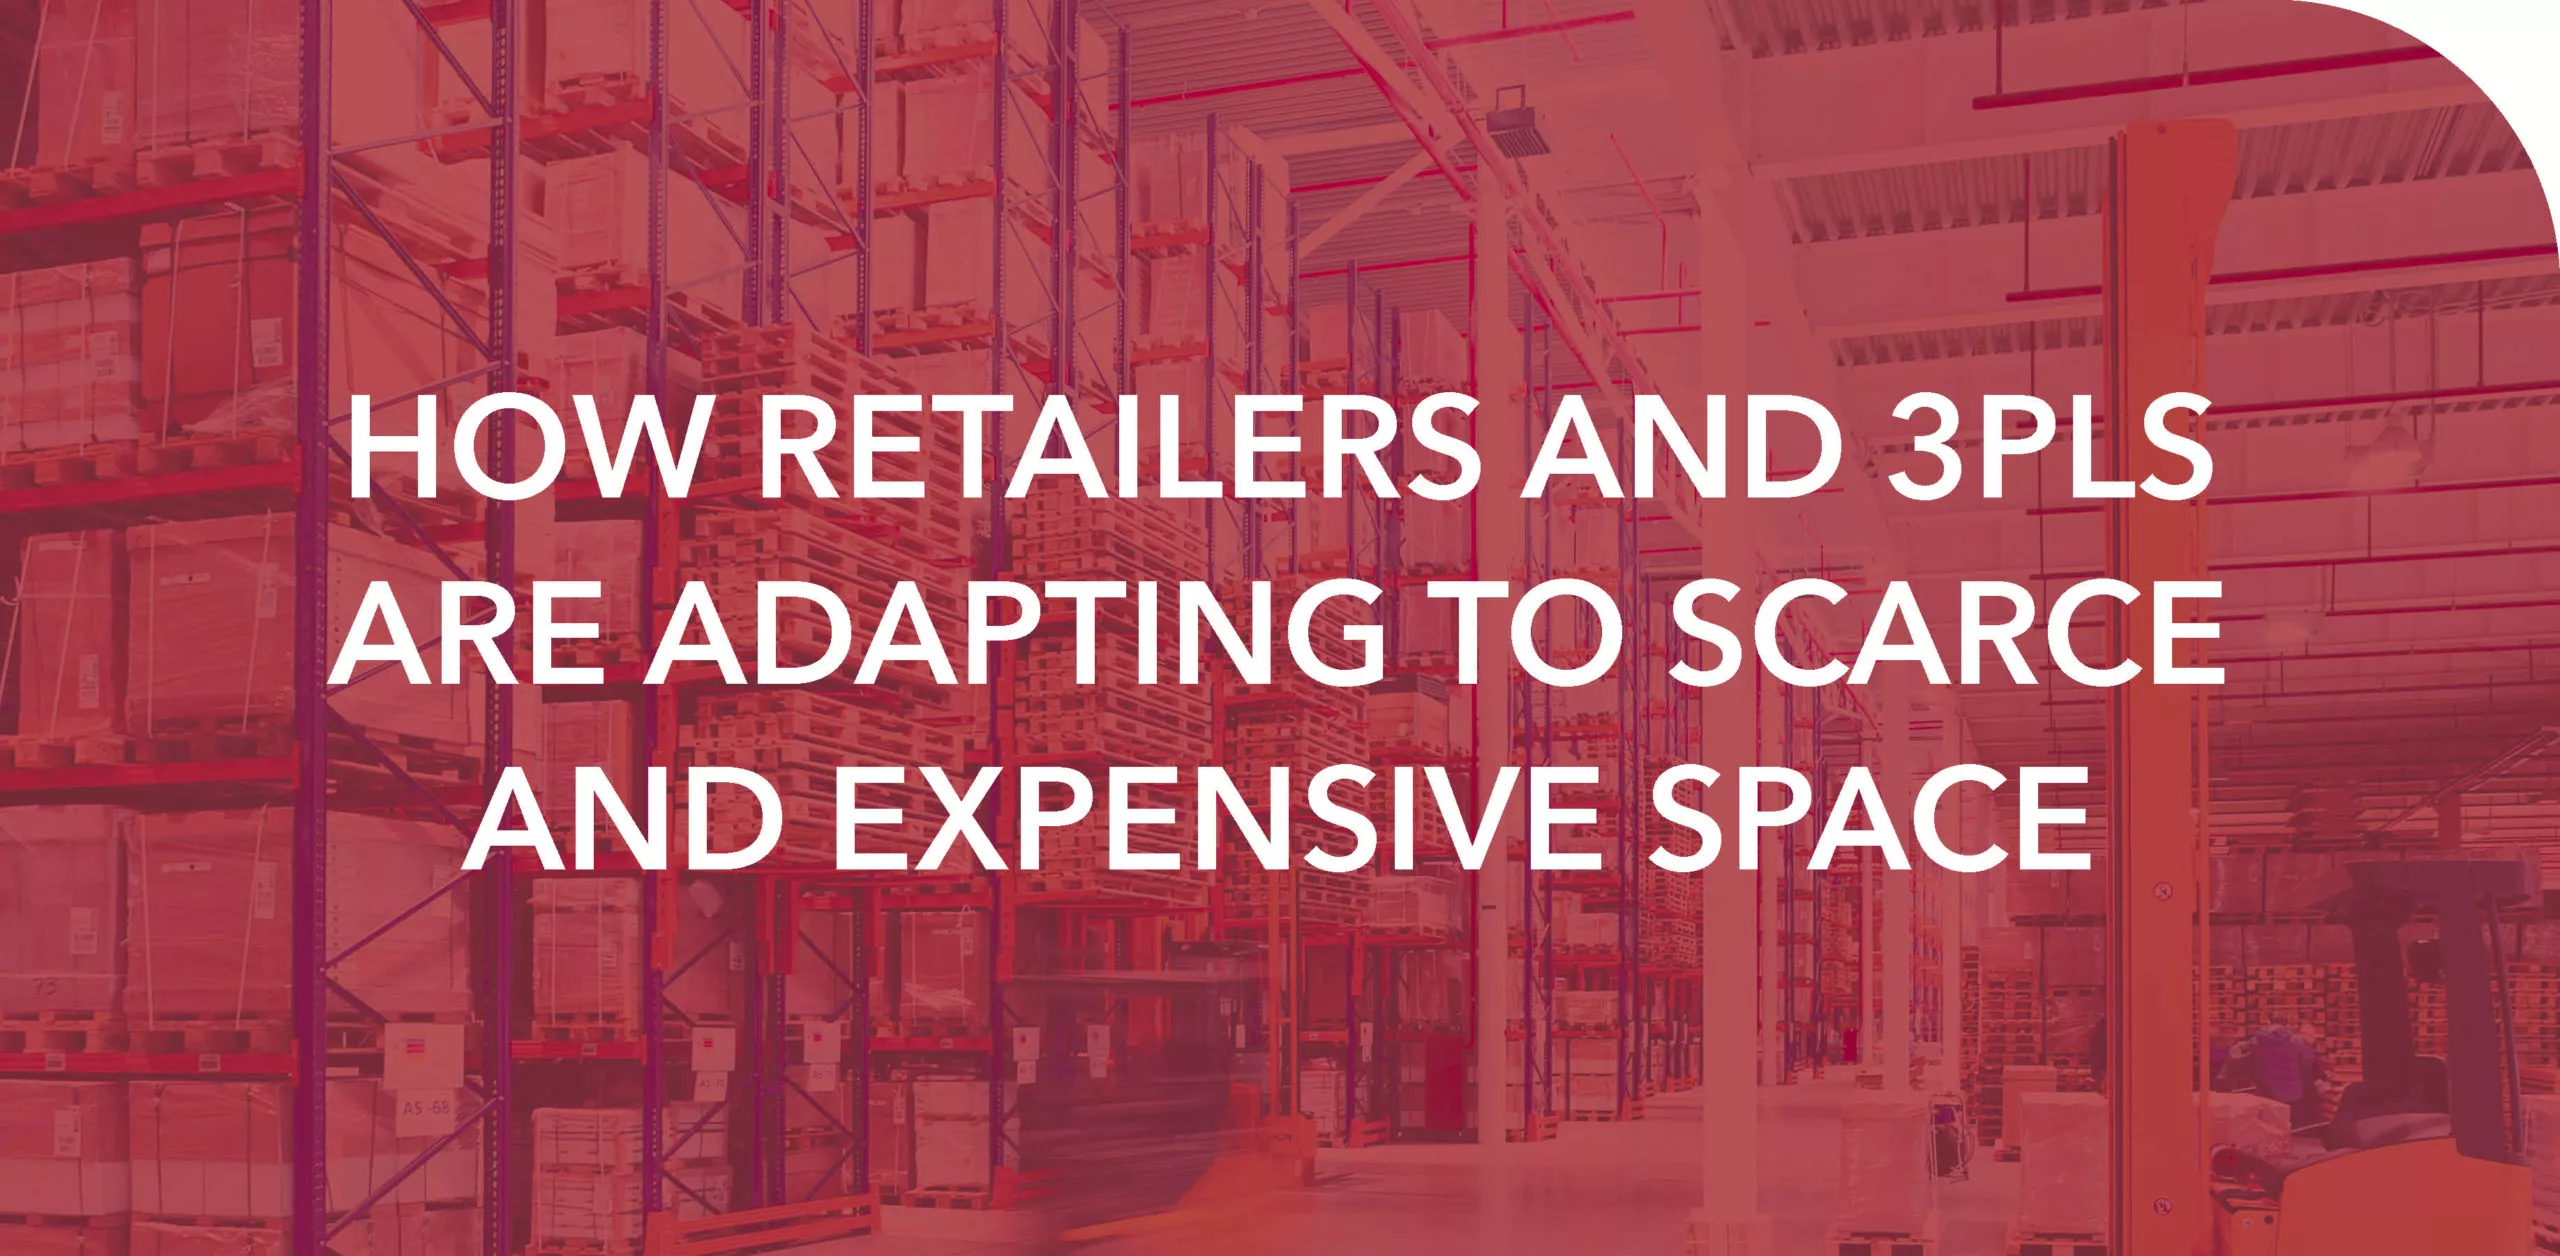 HOW RETAILERS AND 3PLS ARE ADAPTING TO SCARCE AND EXPENSIVE SPACE